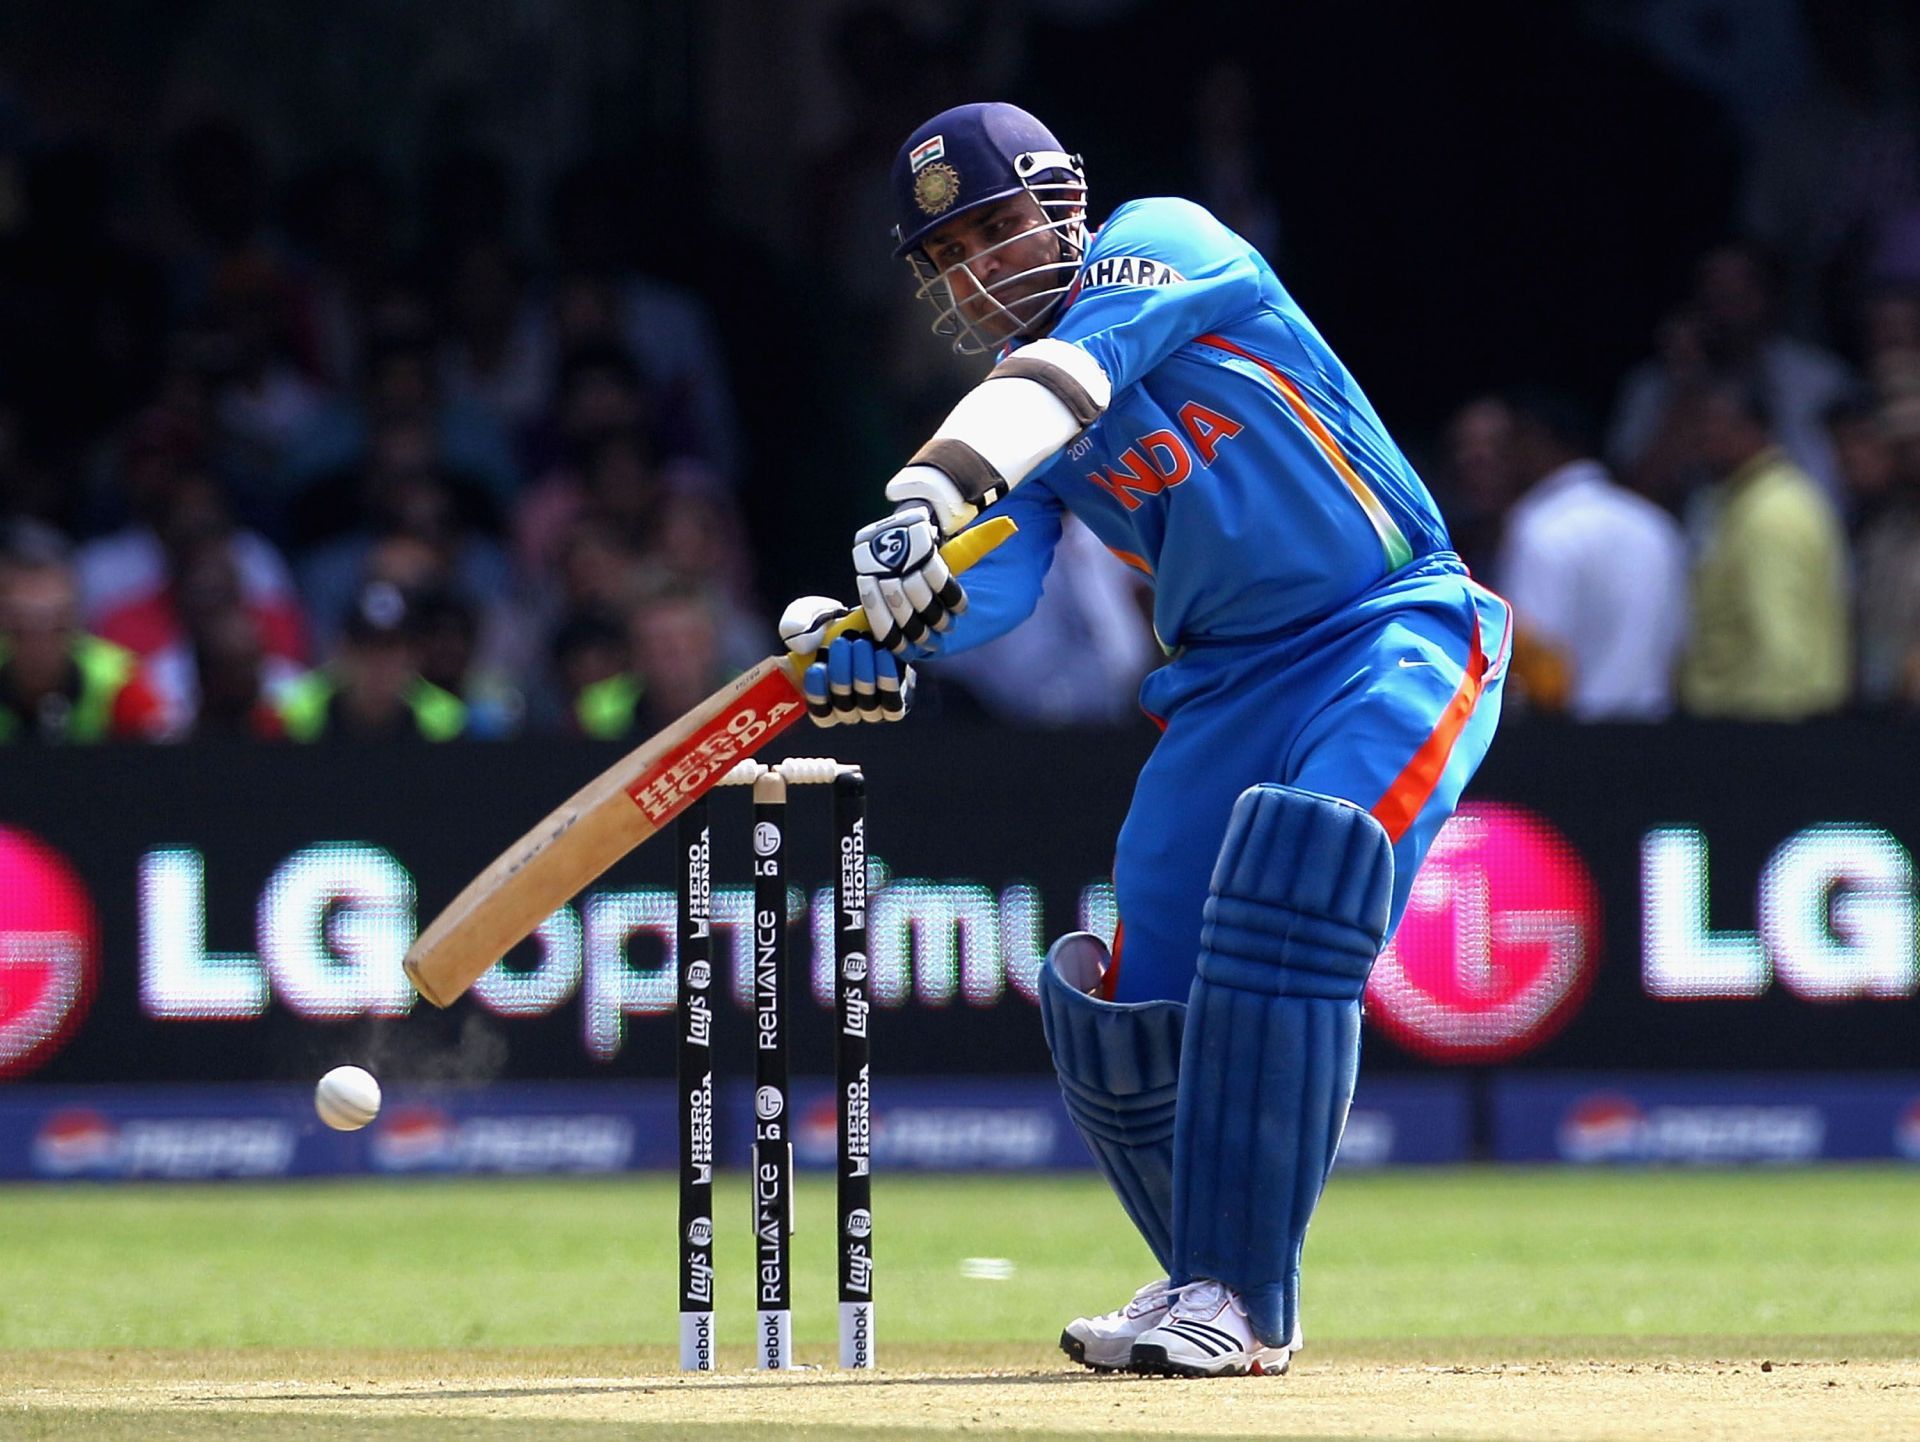 Virender Sehwag during India v England: Group B - 2011 ICC World Cup match (Image: Getty)